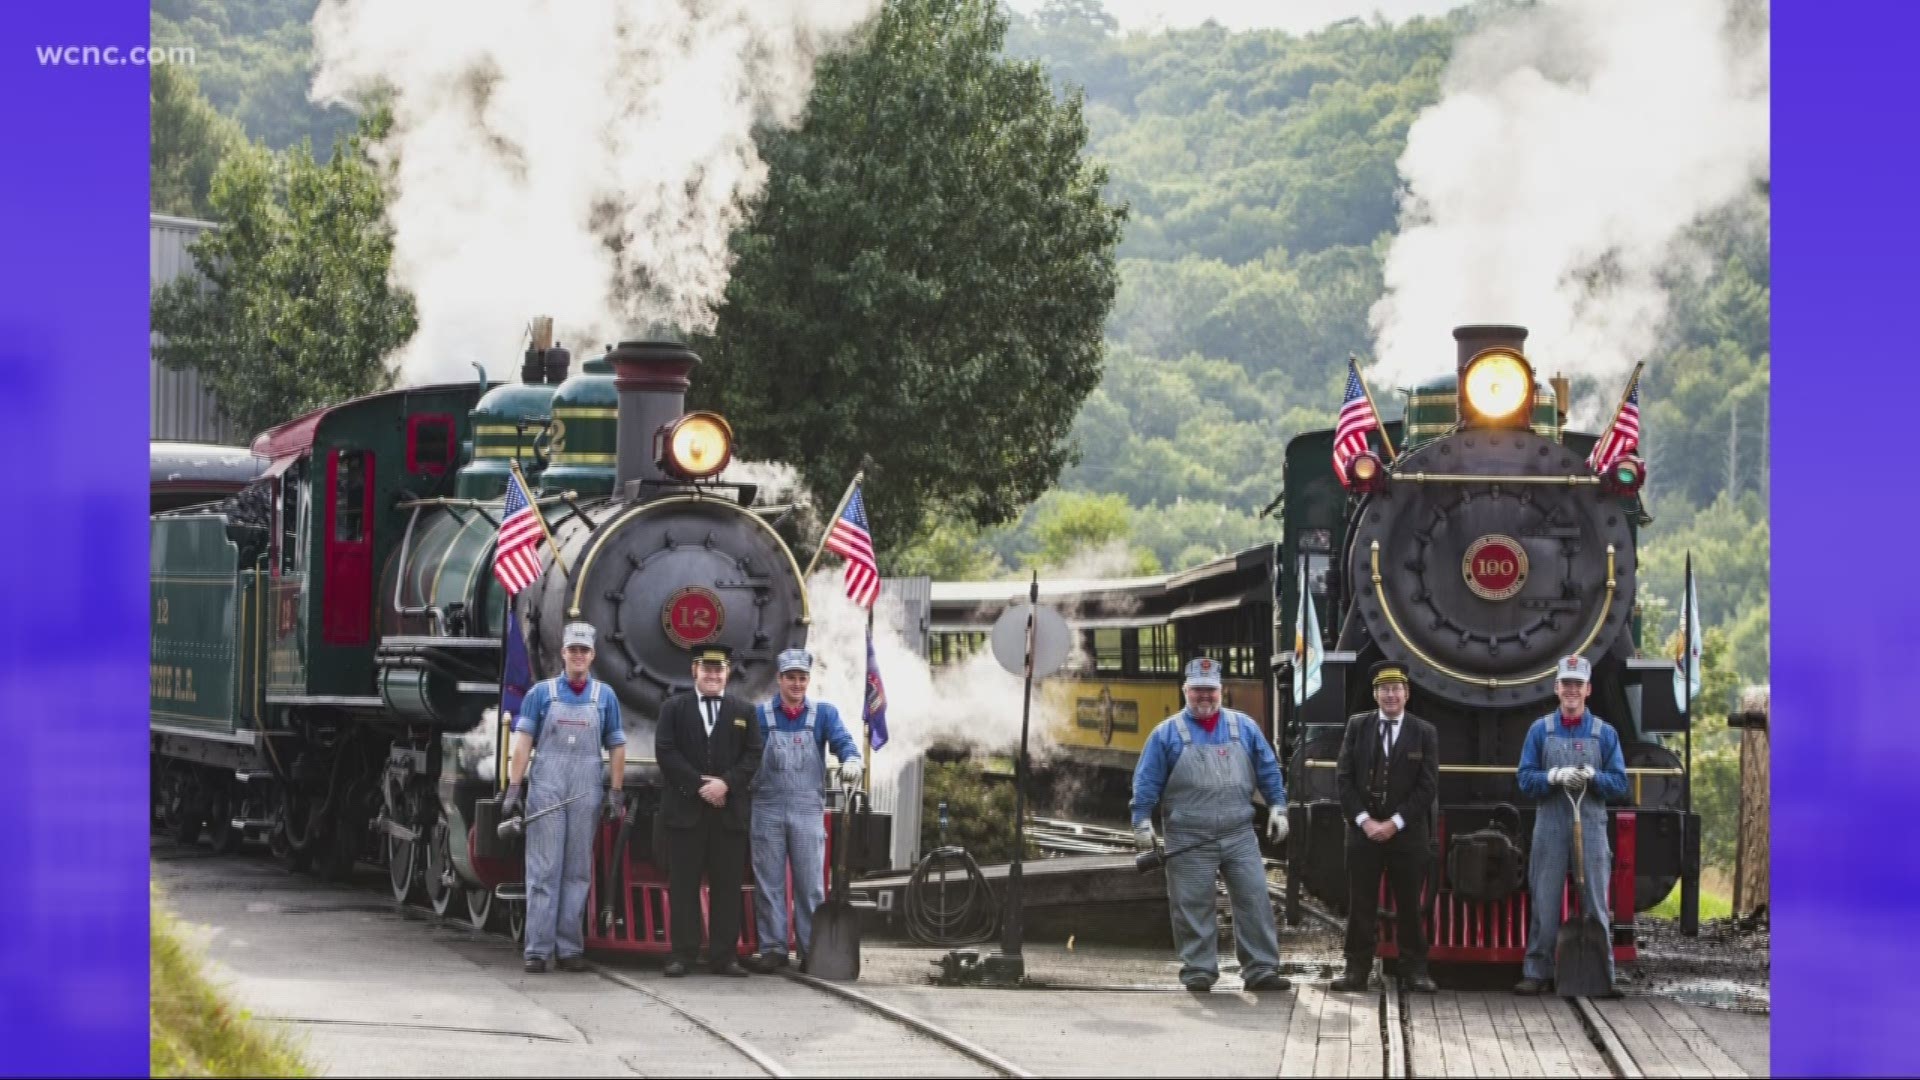 Take a fun trip with the kids this summer without going too far away! Tweetsie Railroad in the mountains offers countless attractions the kids will love.